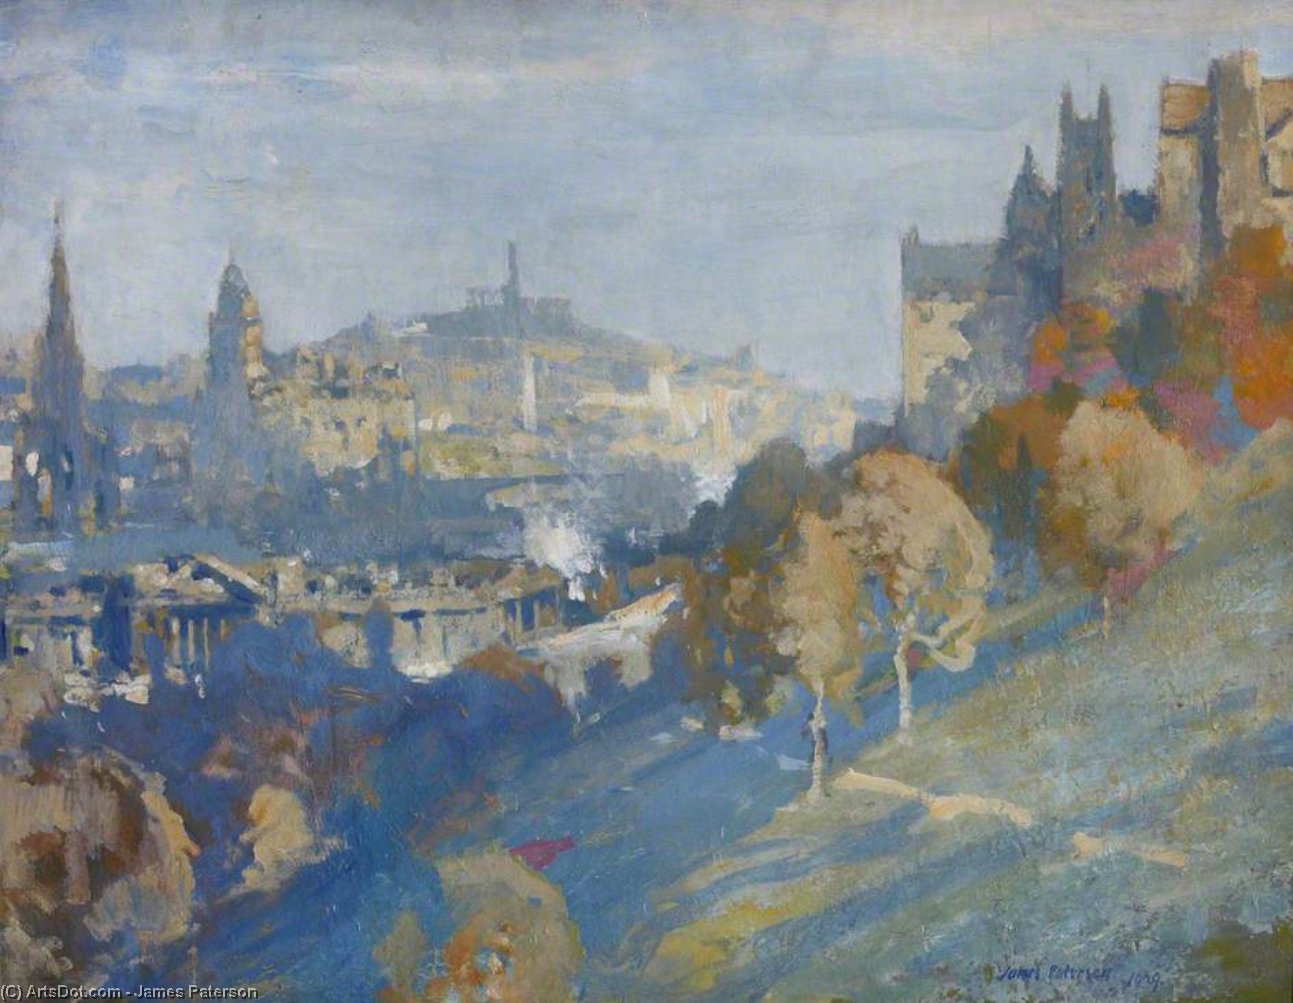 Buy Museum Art Reproductions From The Castle To The Calton Hill by James Paterson (1854-1932) | ArtsDot.com